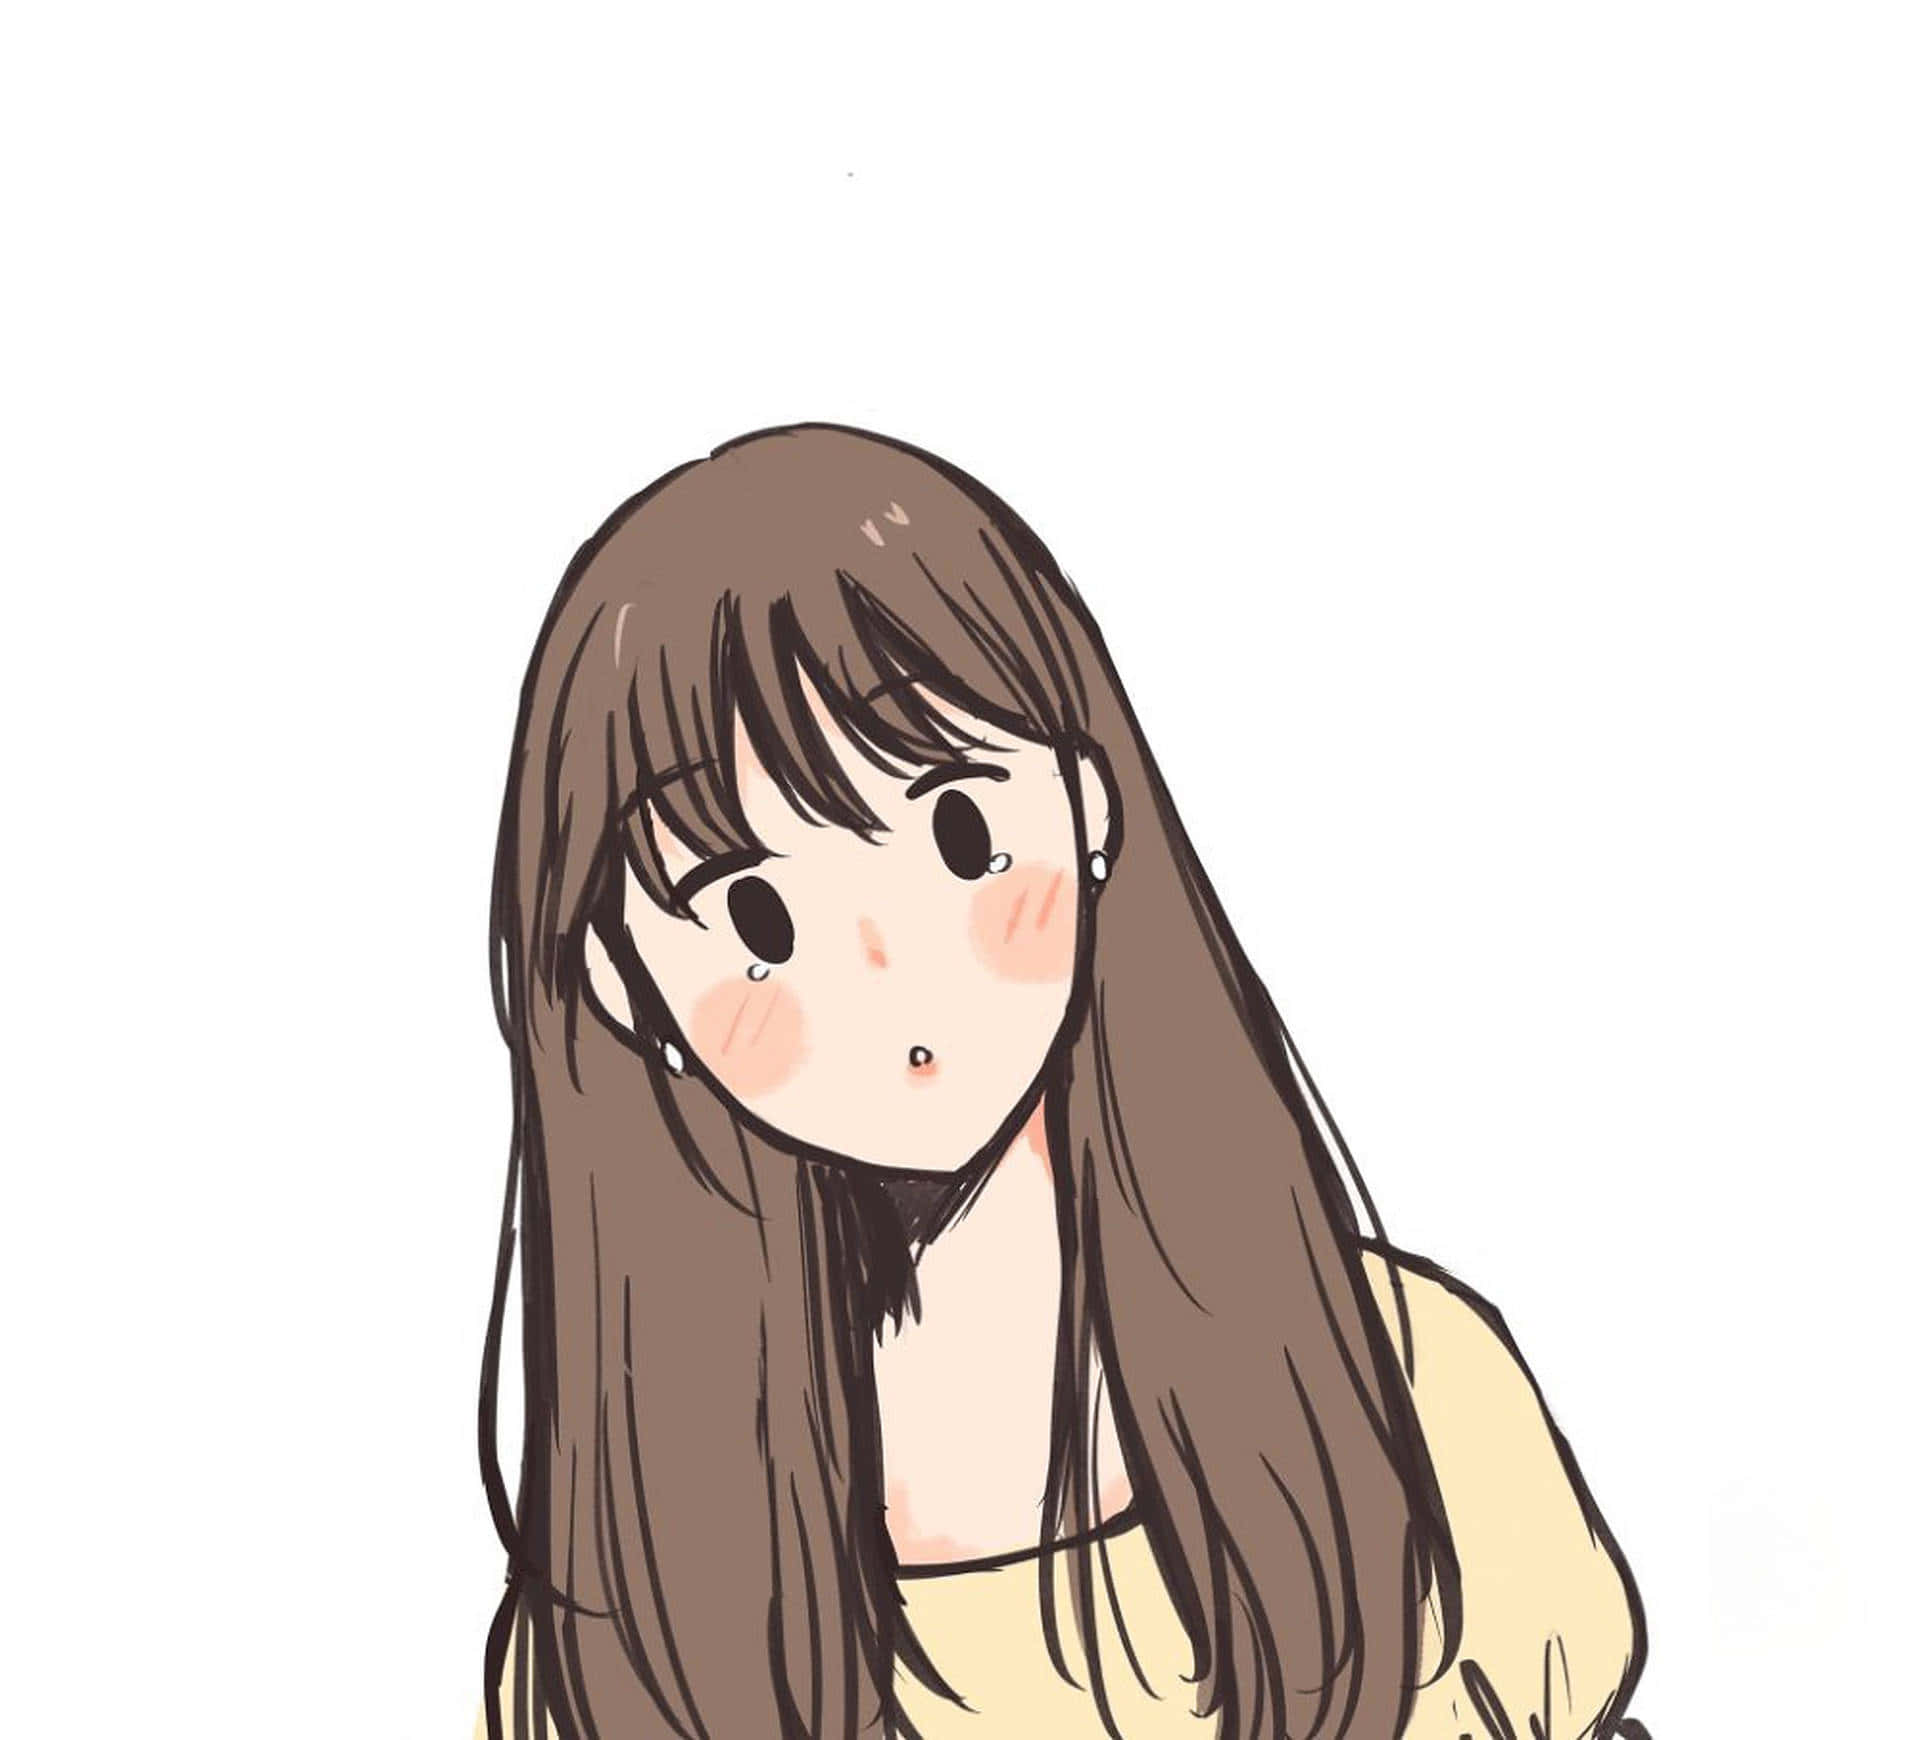 A Girl With Long Hair And A Yellow Shirt